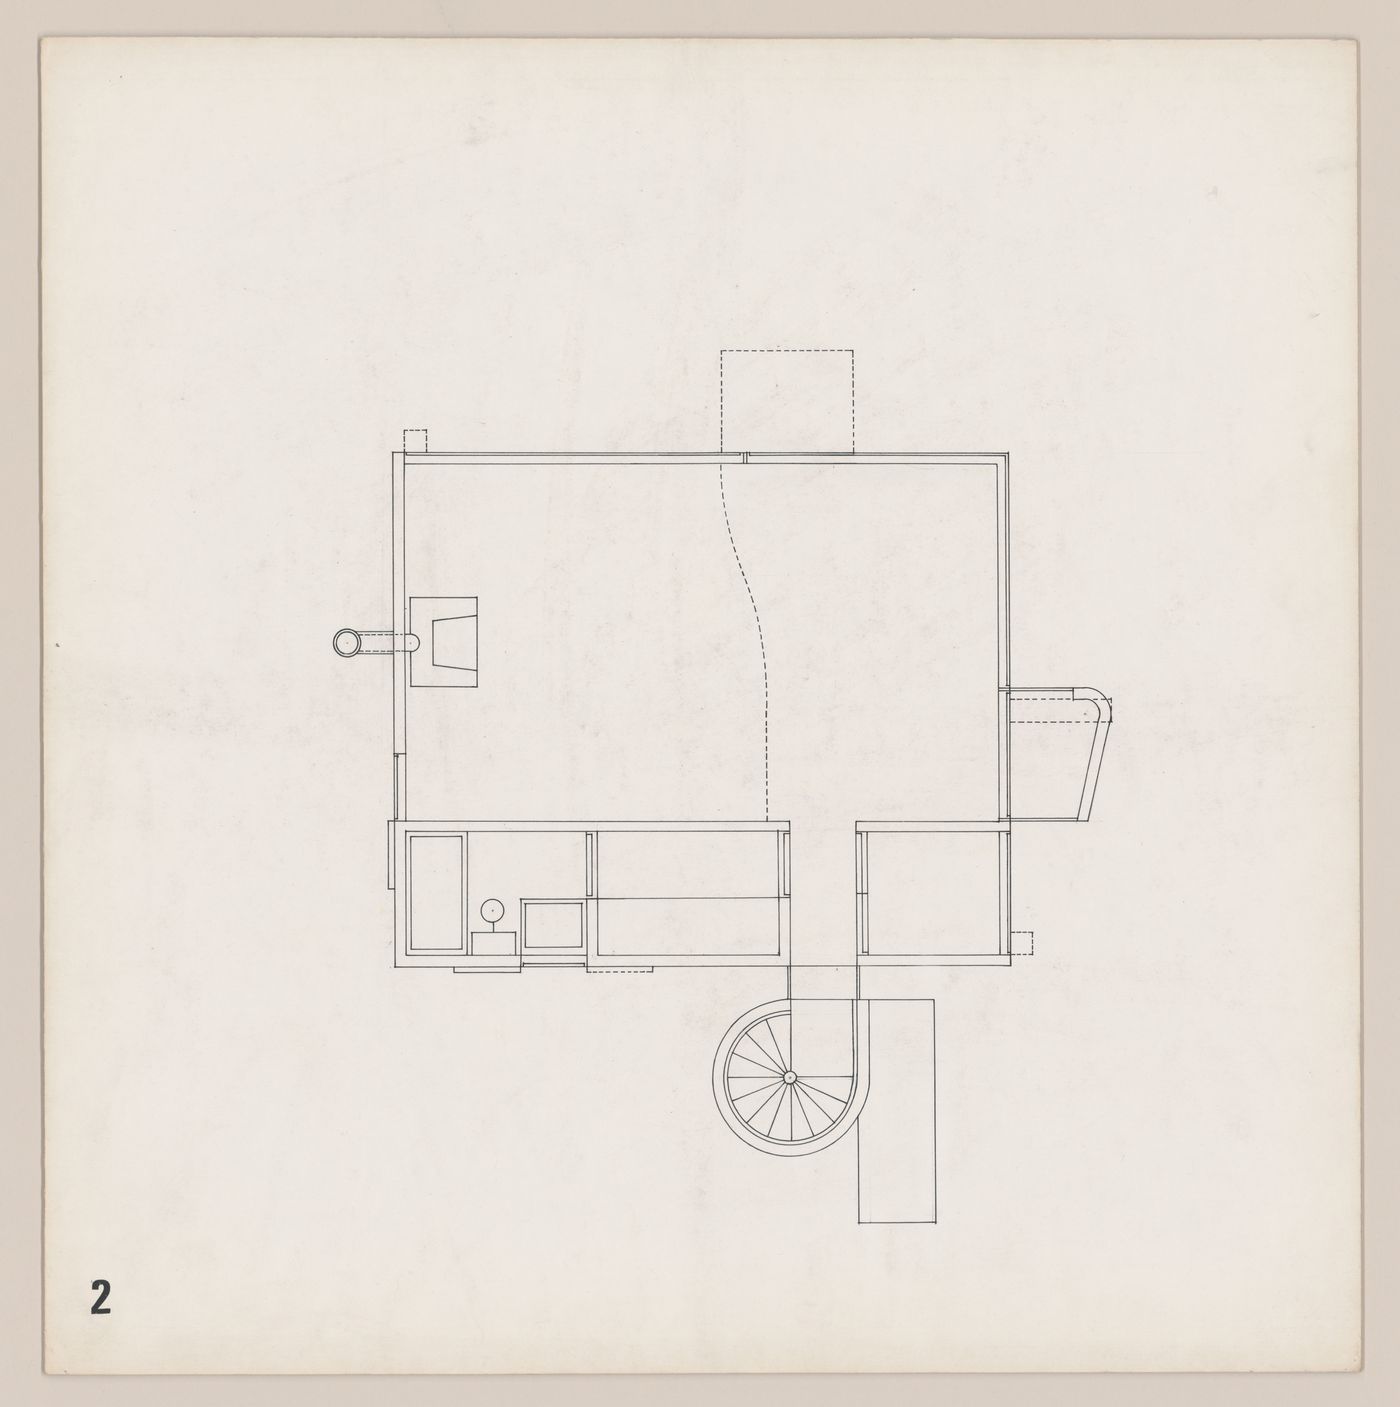 Second floor plan with sketches on verso for Bernstein House